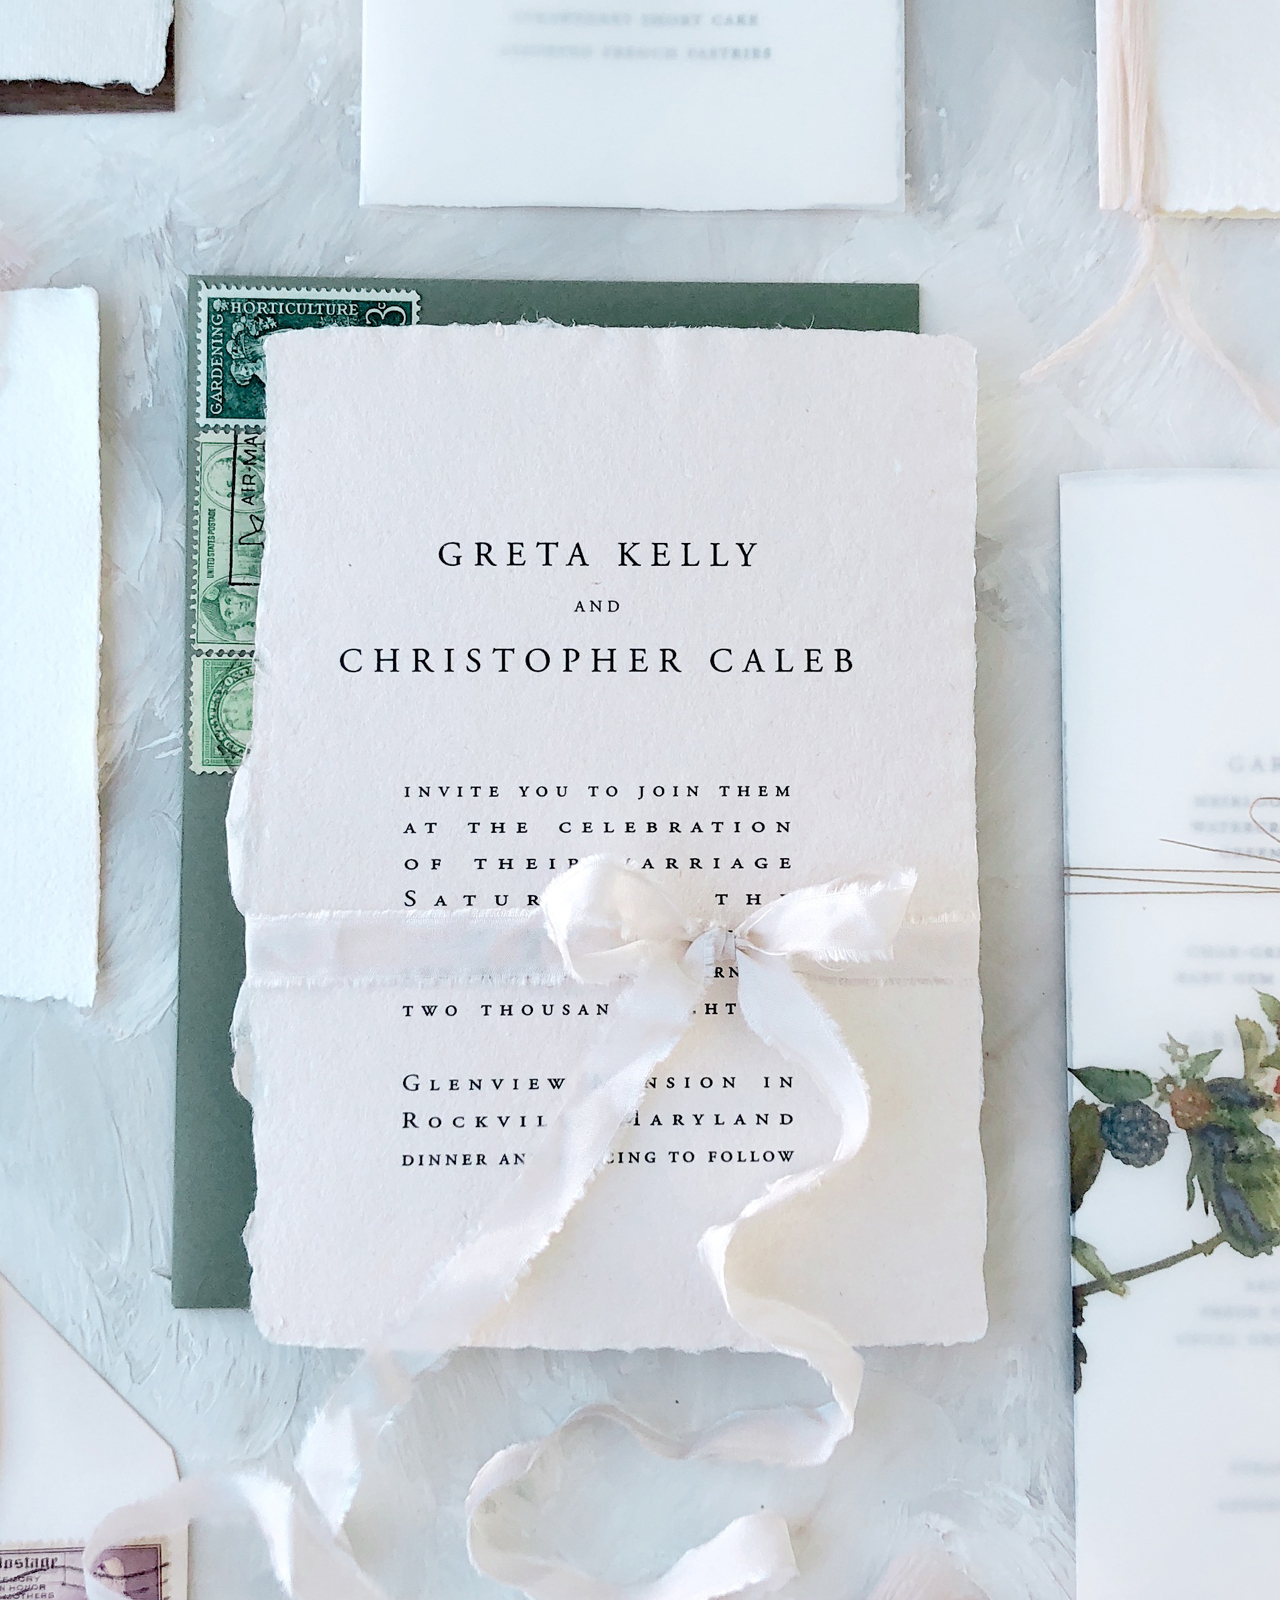 Minimalist Type-Driven Deckle Edge Wedding Invitations by Every Little Letter